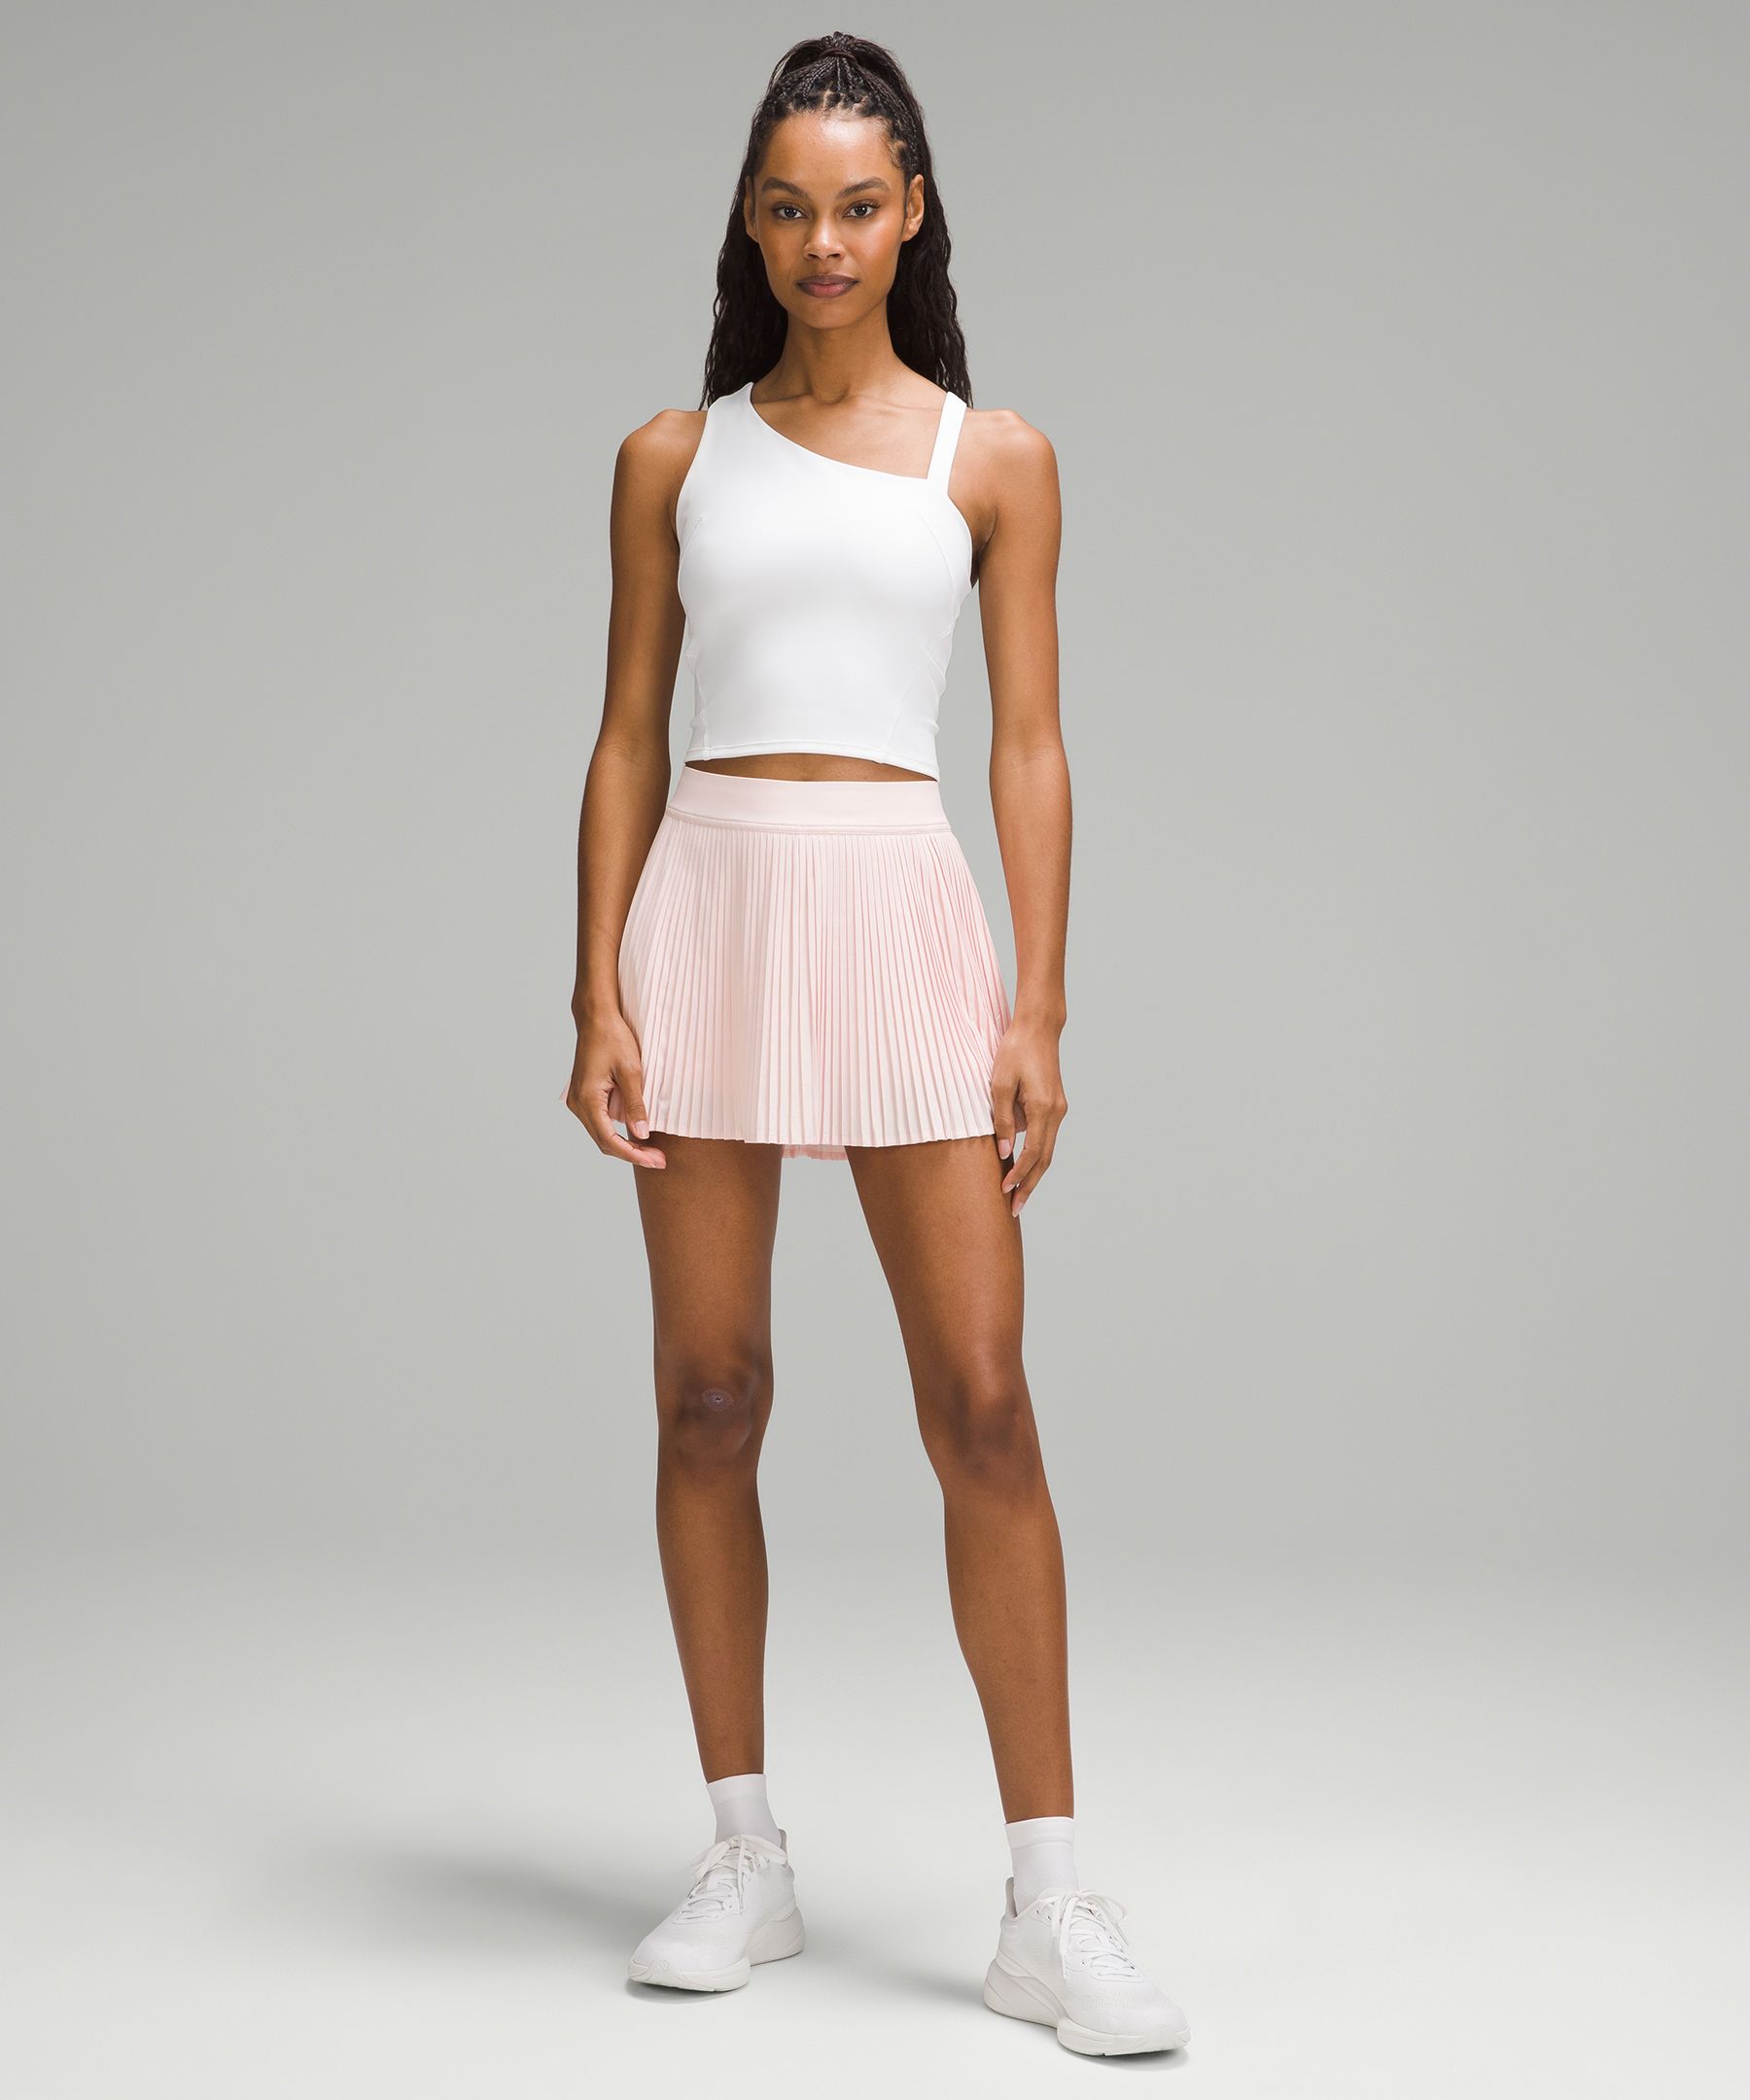 Cute Skirt Outfits Workout Fast Tennis Fitness Running Yoga False Athletic  Women's Cute Skirts for Girls 10-12, Z3-white, X-Large : : Clothing,  Shoes & Accessories